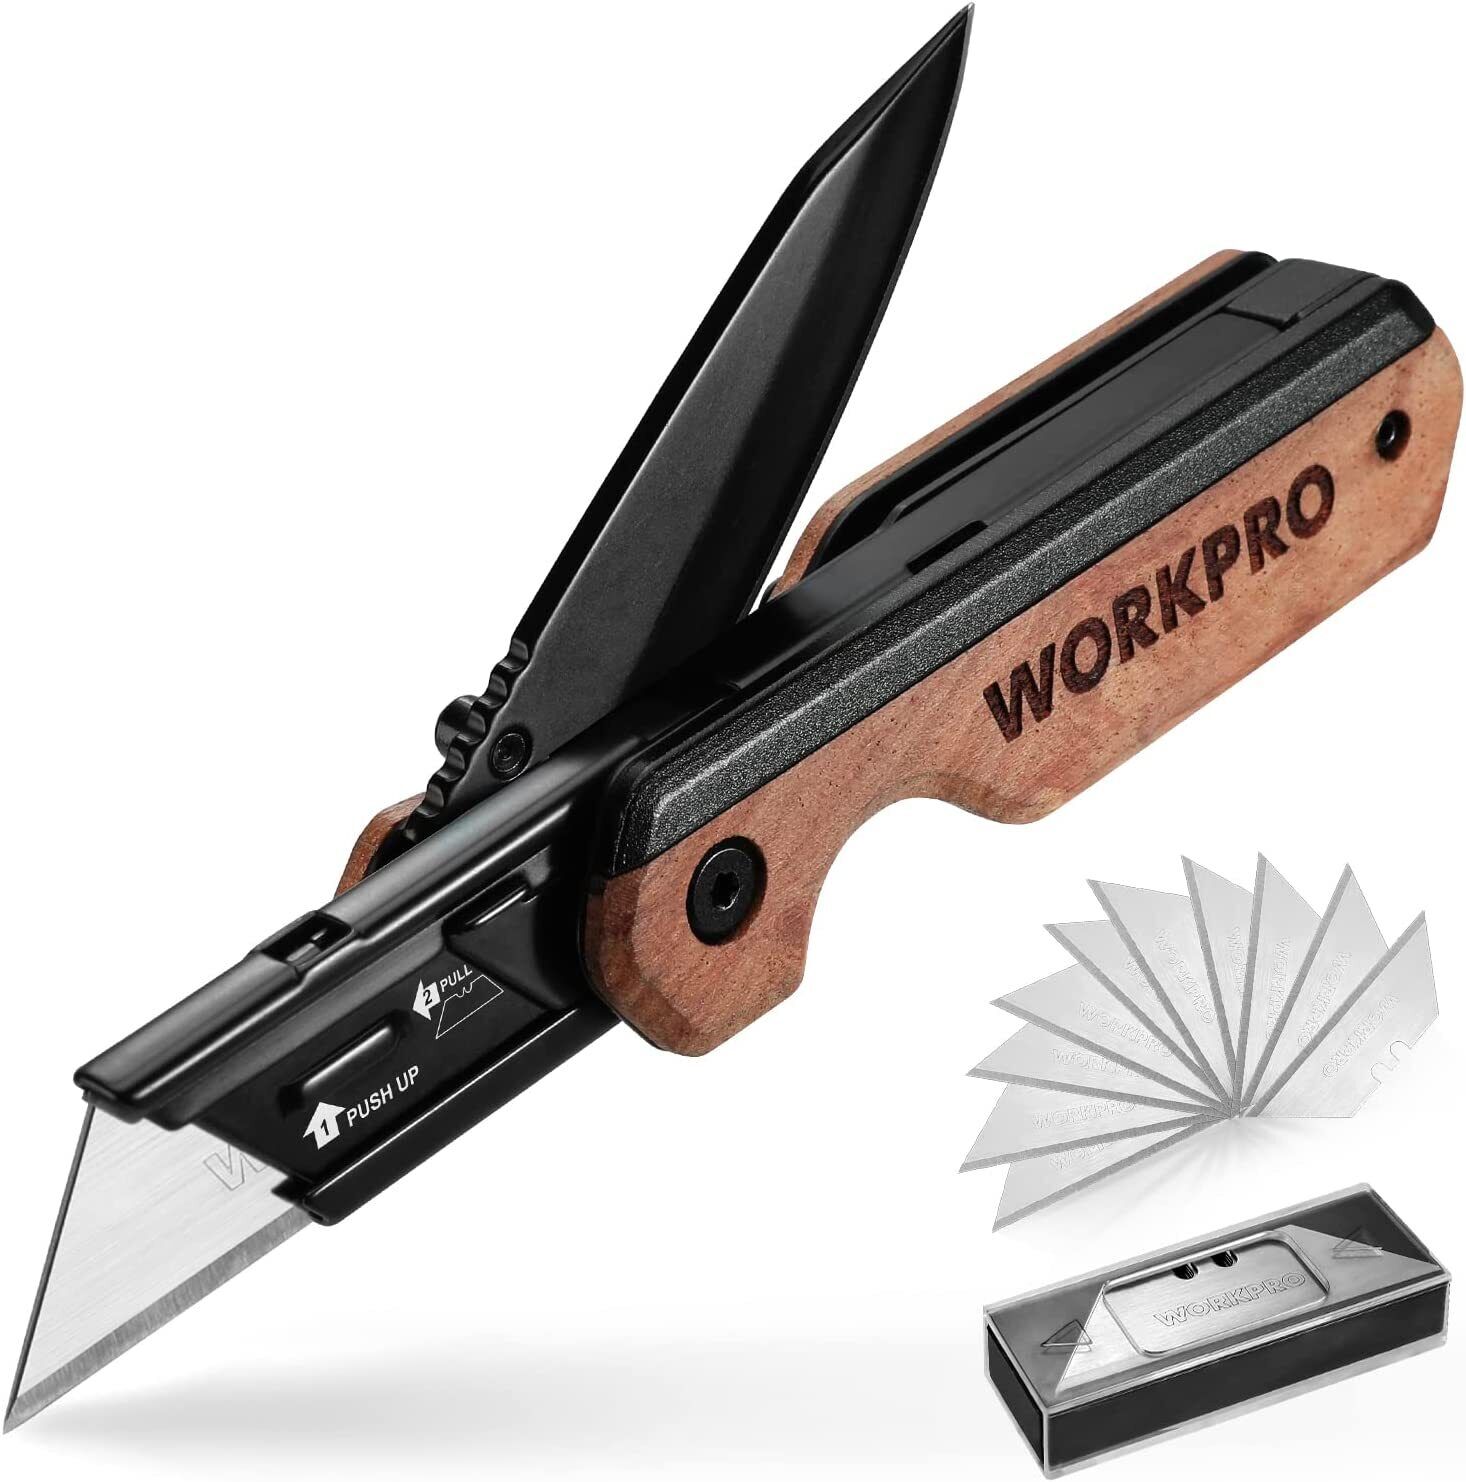 WORKPRO 2-in-1 Folding Knife/Utility Knife w/Belt Clip and Liner Lock W/10Blades